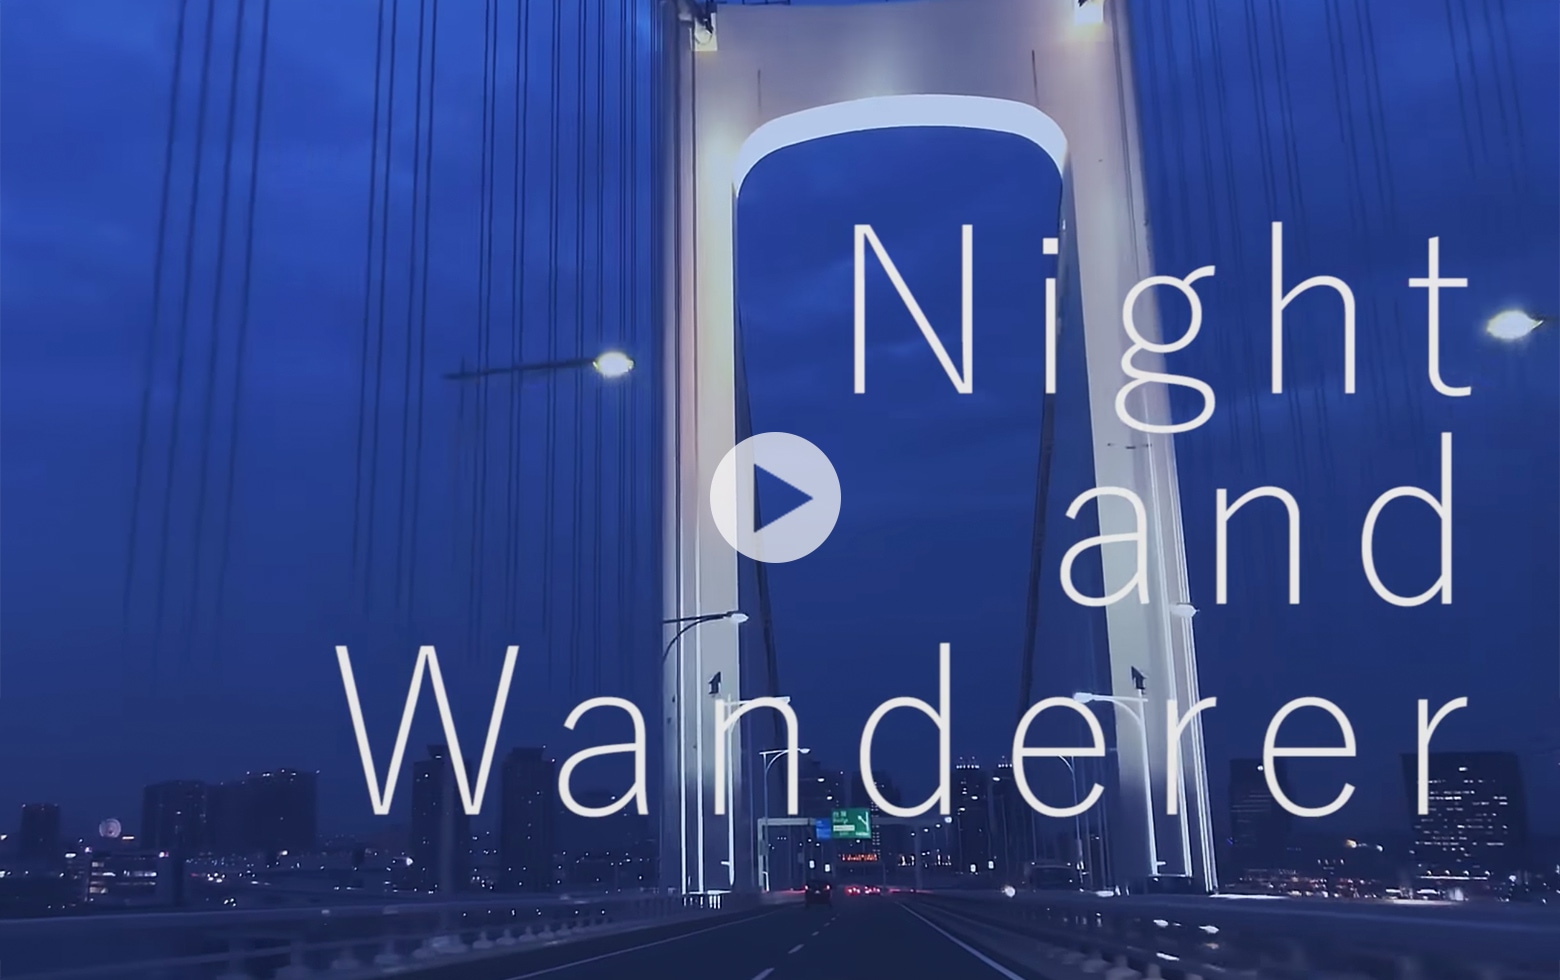 theme02 "Night and Wanderer" Trailer